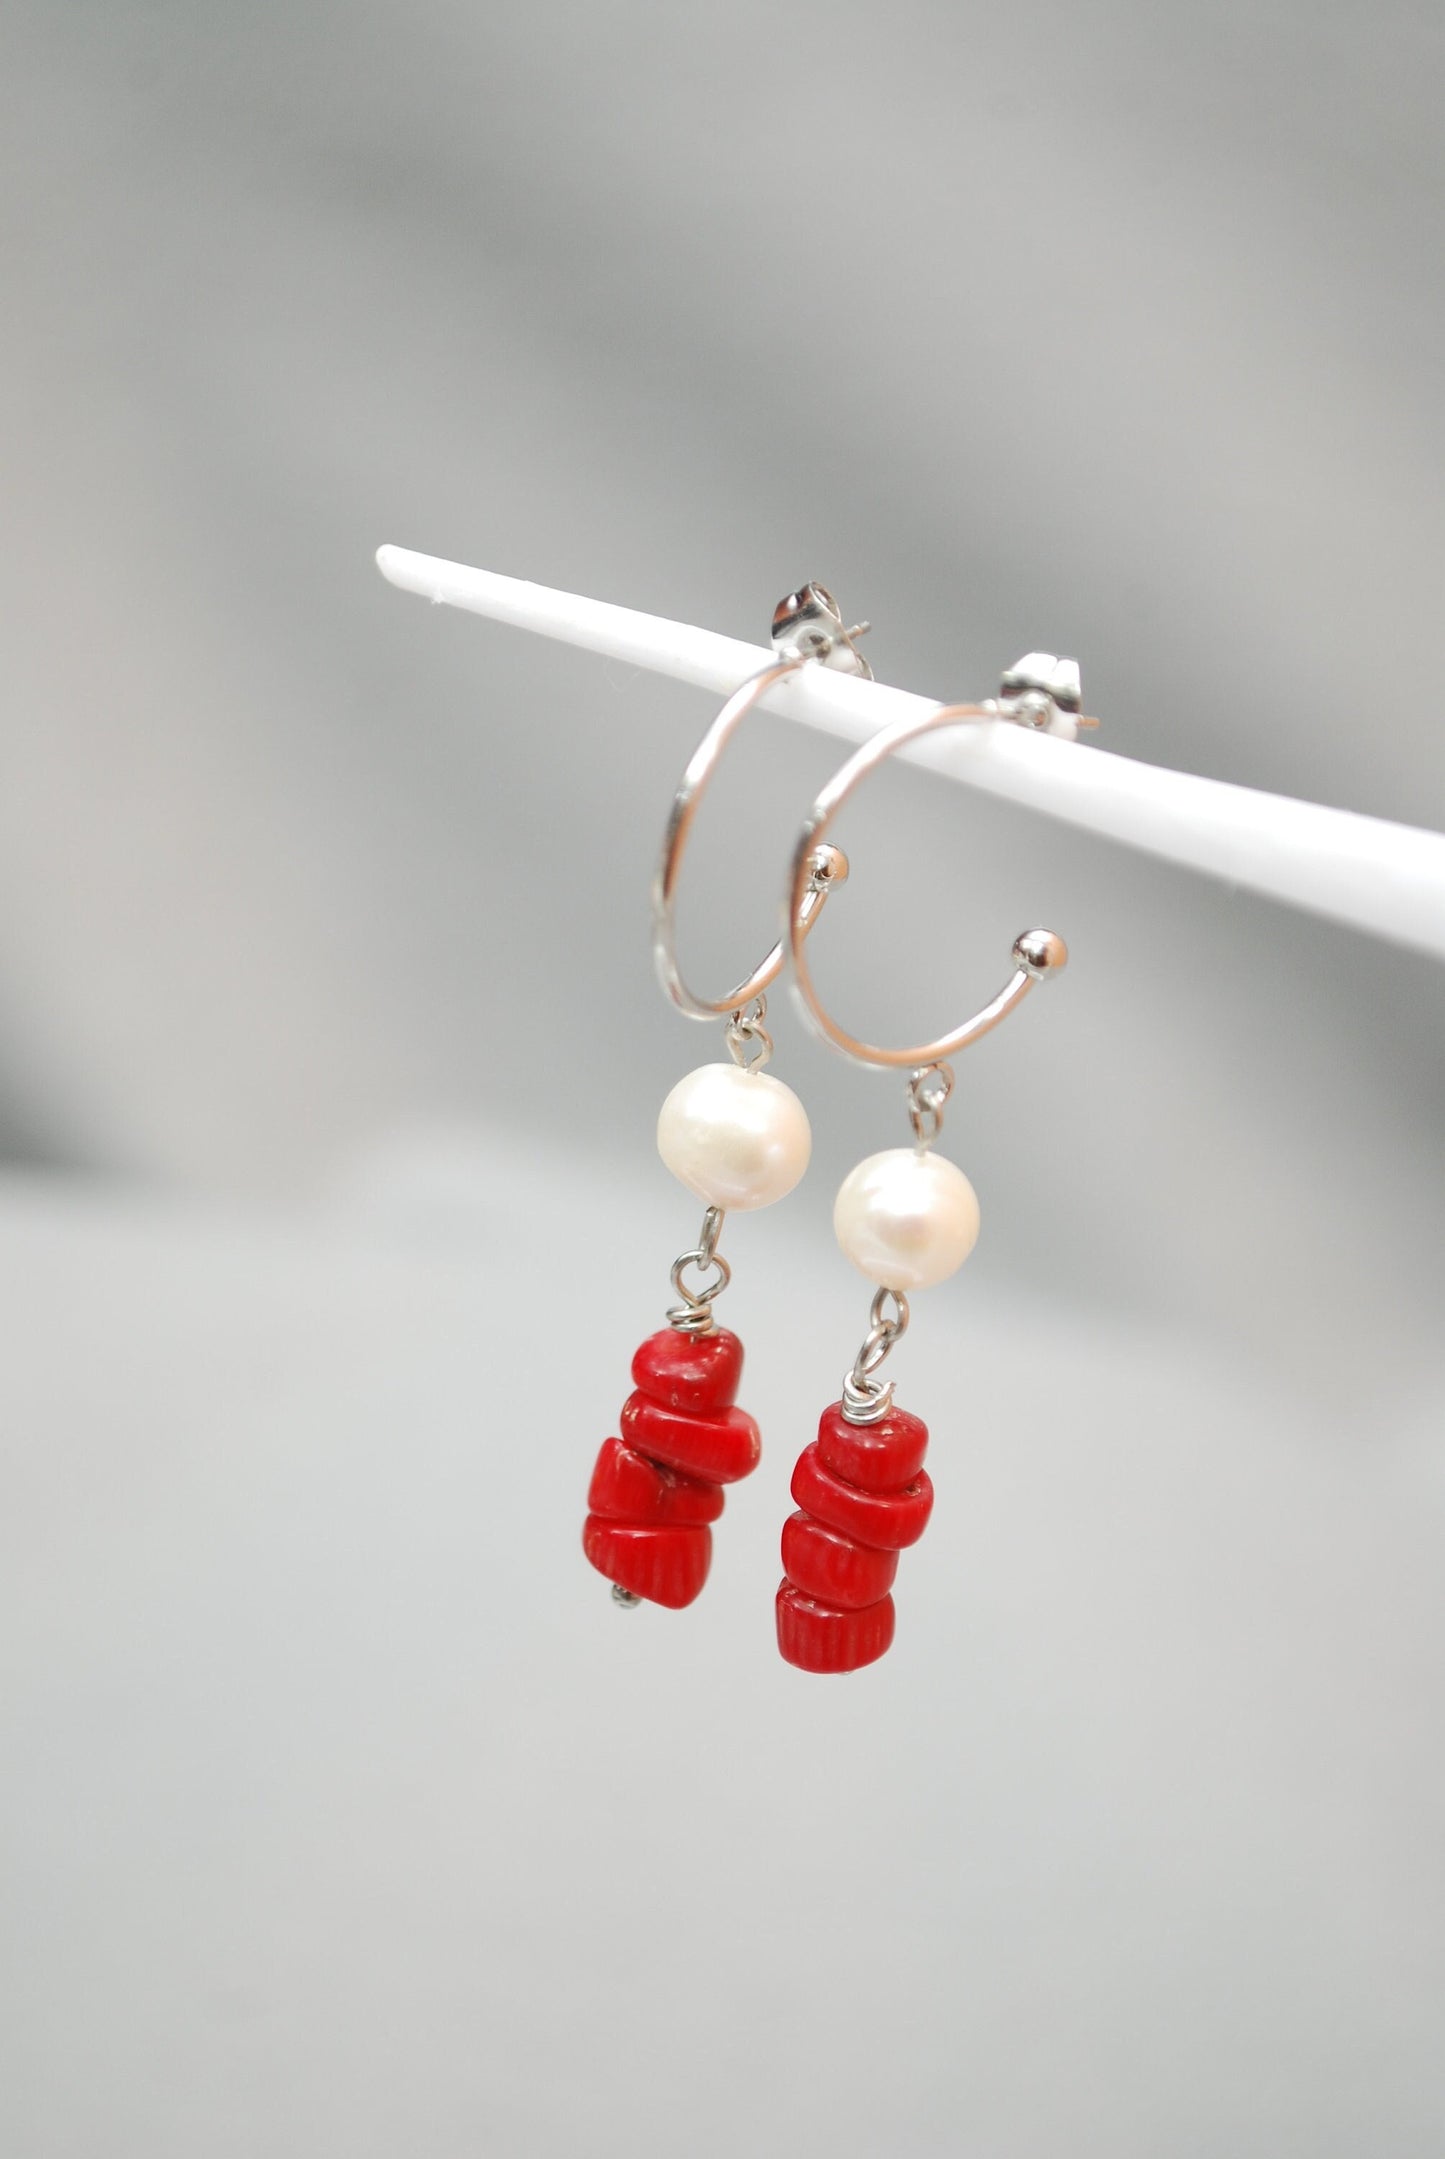 Stainless Steel Earrings with River Pearl Bead and Red Coral Stone Accents - Estibela design -5.4cm 2.2"